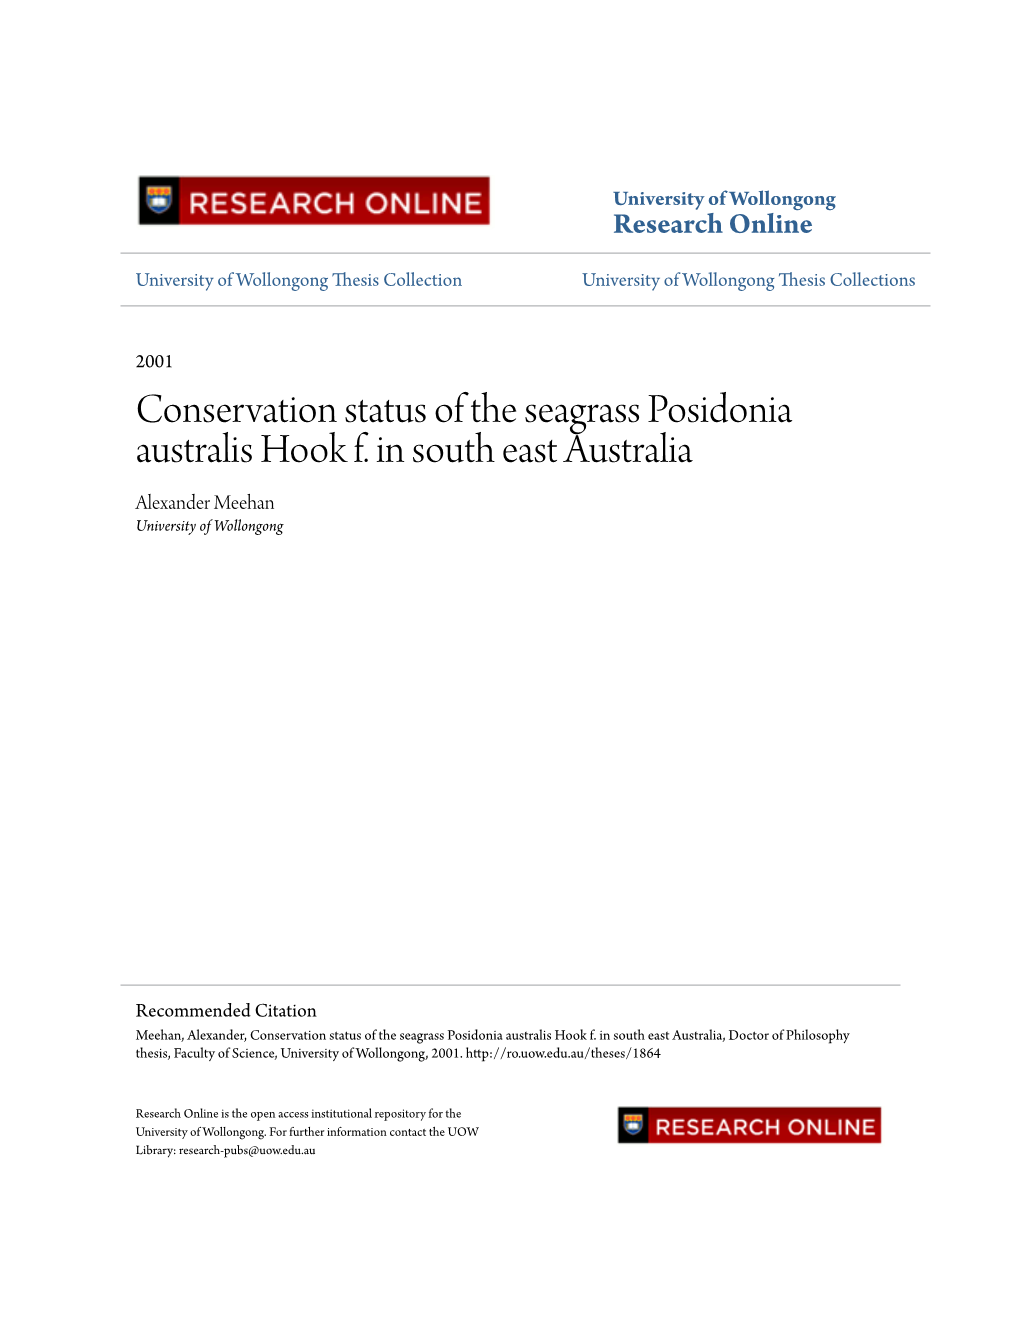 Conservation Status of the Seagrass Posidonia Australis Hook F. in South East Australia Alexander Meehan University of Wollongong